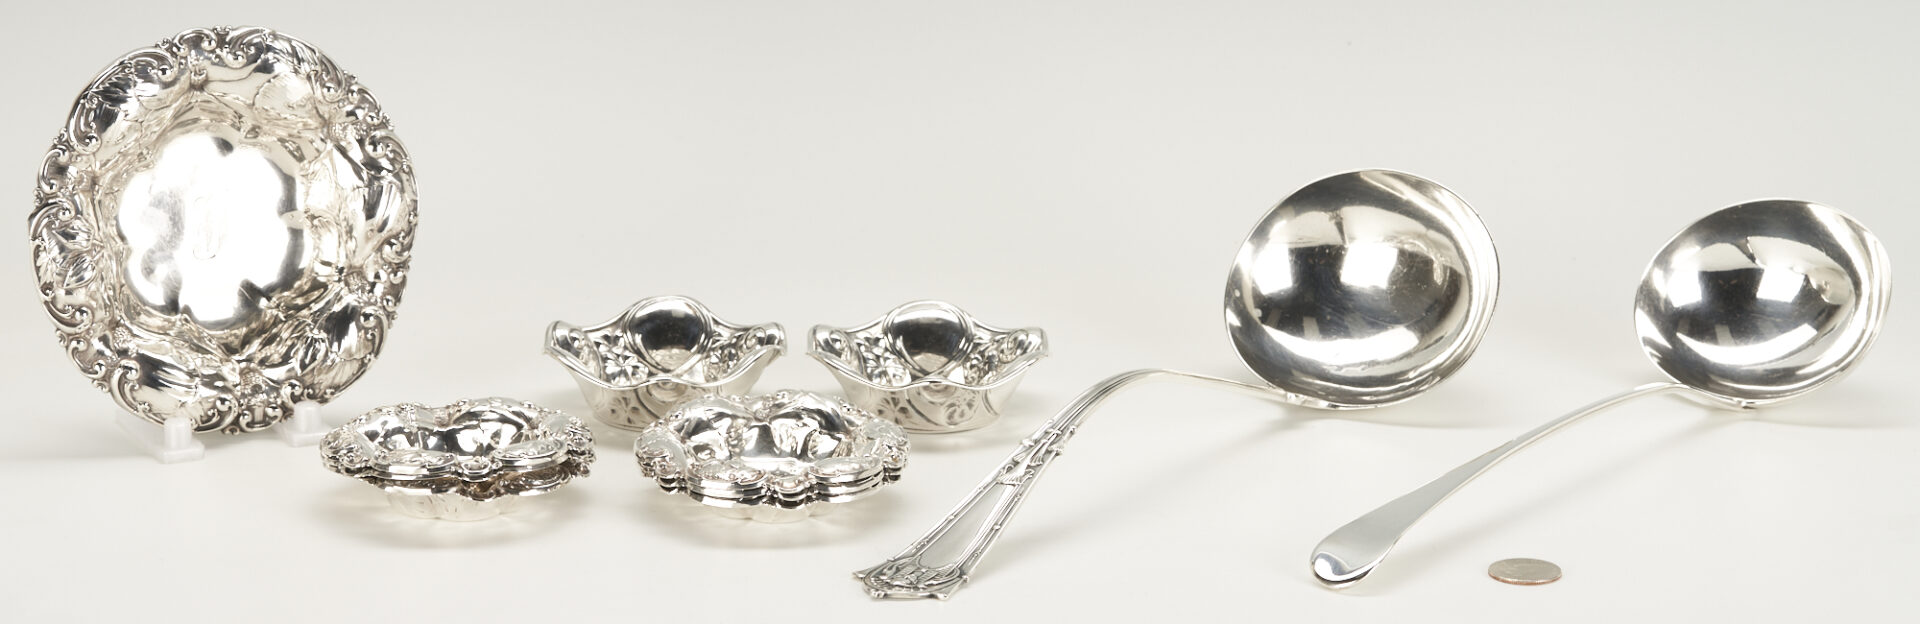 Lot 1098: 11 Assembled Sterling Silver Serving Pieces, American & English